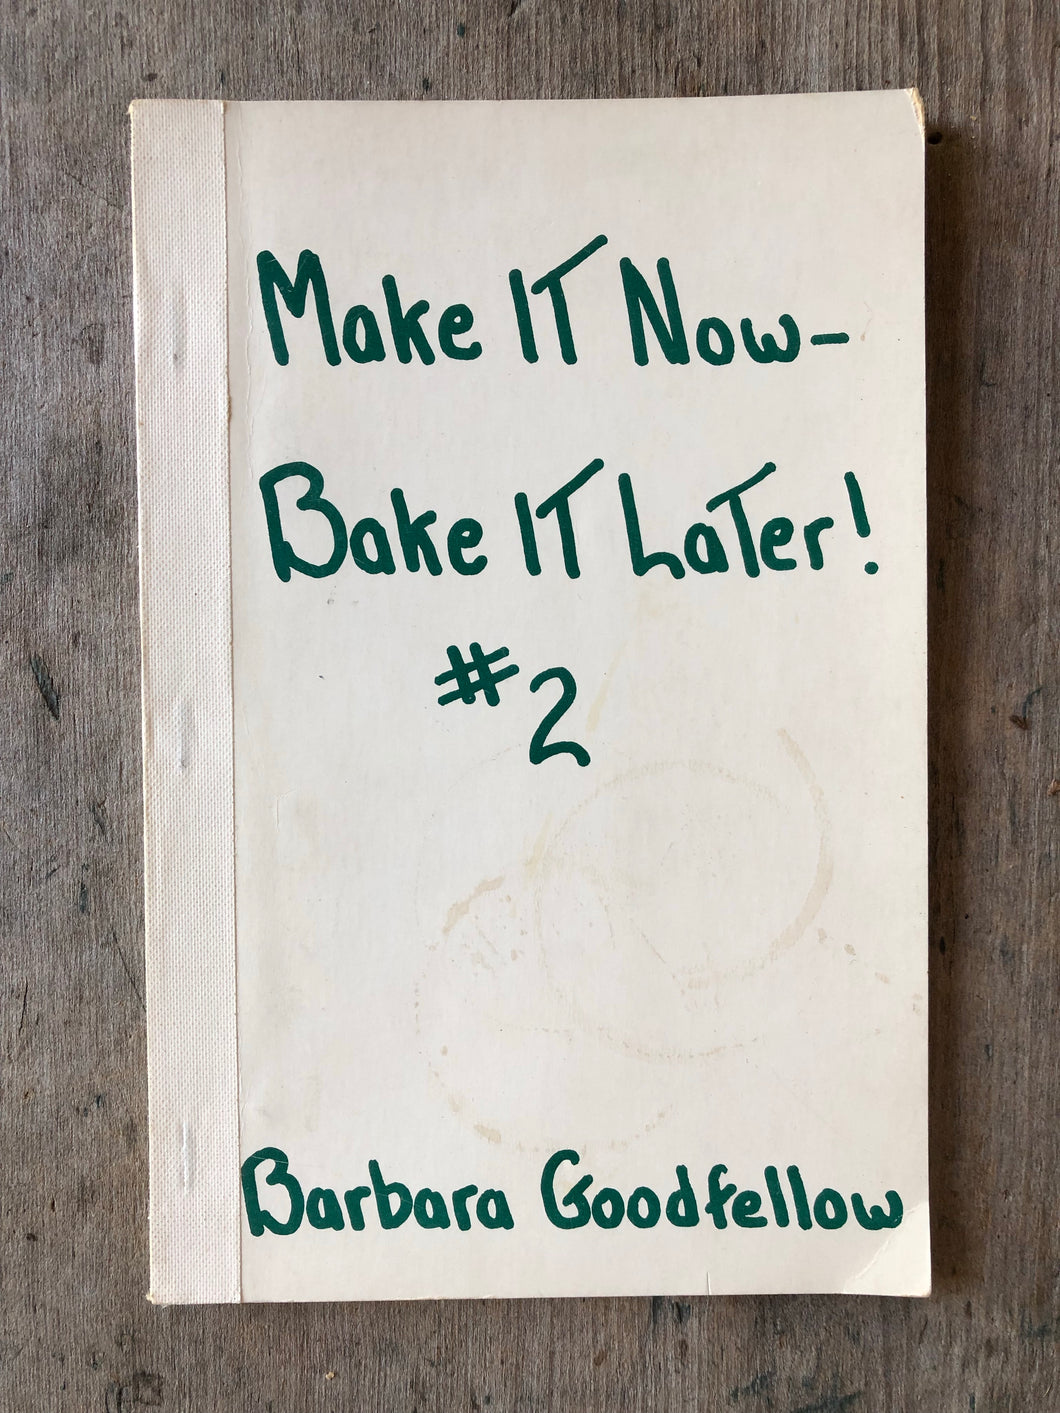 Make It Now- Bake It Later! # 2 by Barbara Goodfellow